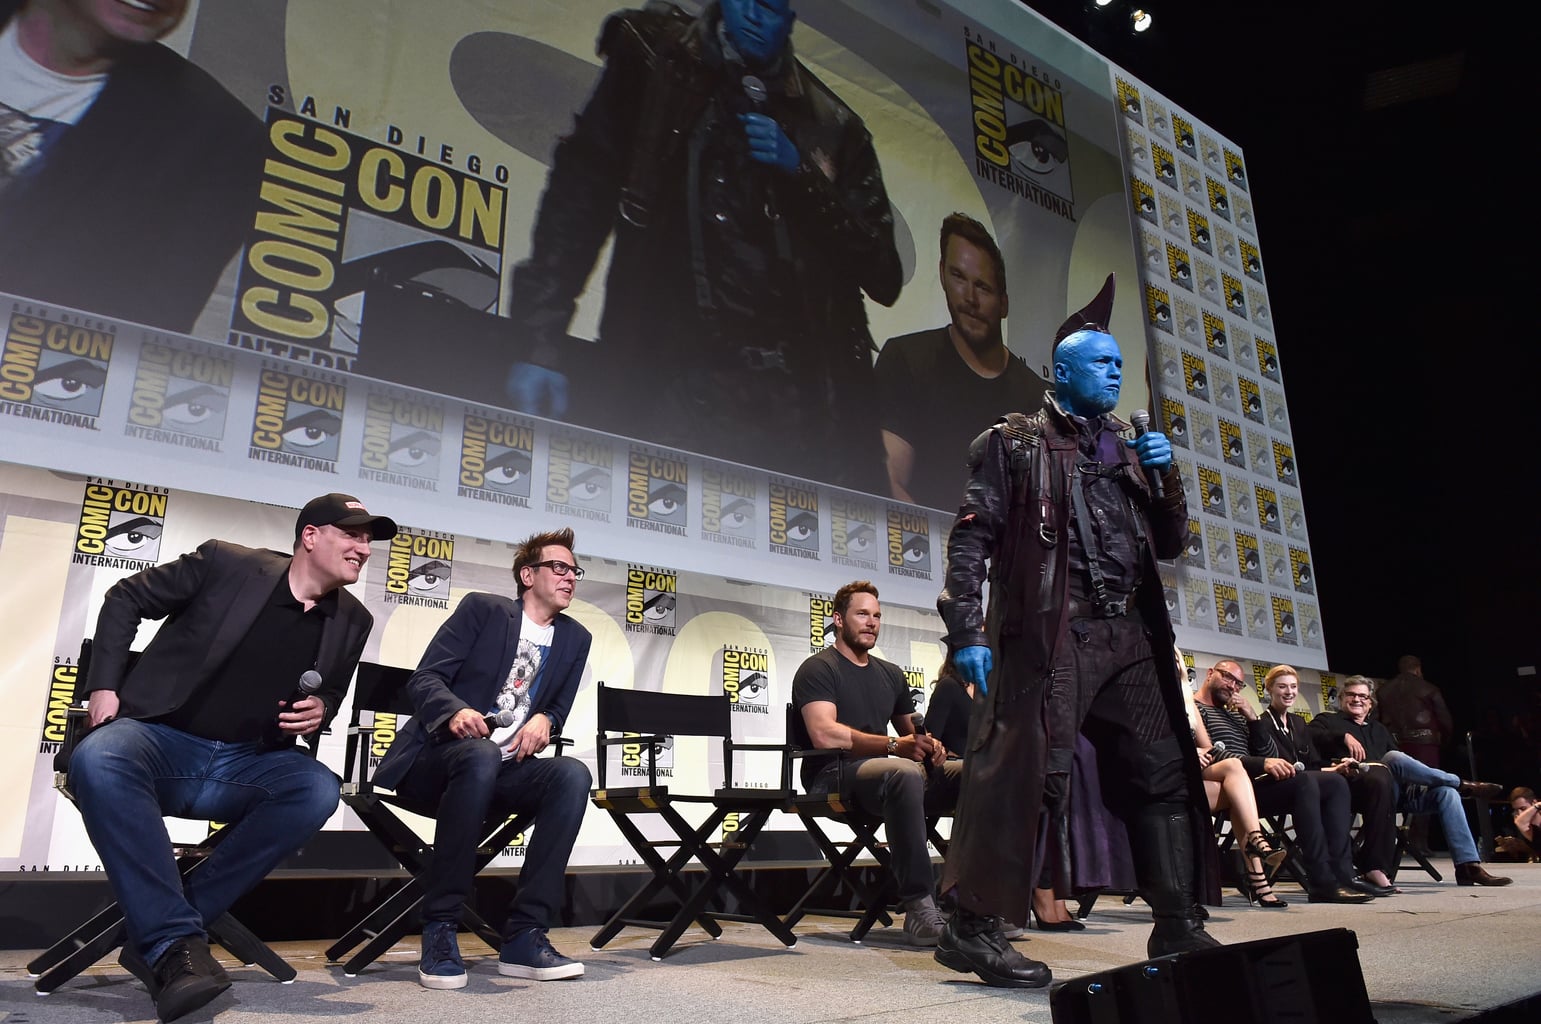 Who's ready to get to know a little about Michael Rooker, Yondu of Guardians of the Galaxy Vol 2? Let me try to set this up for you.